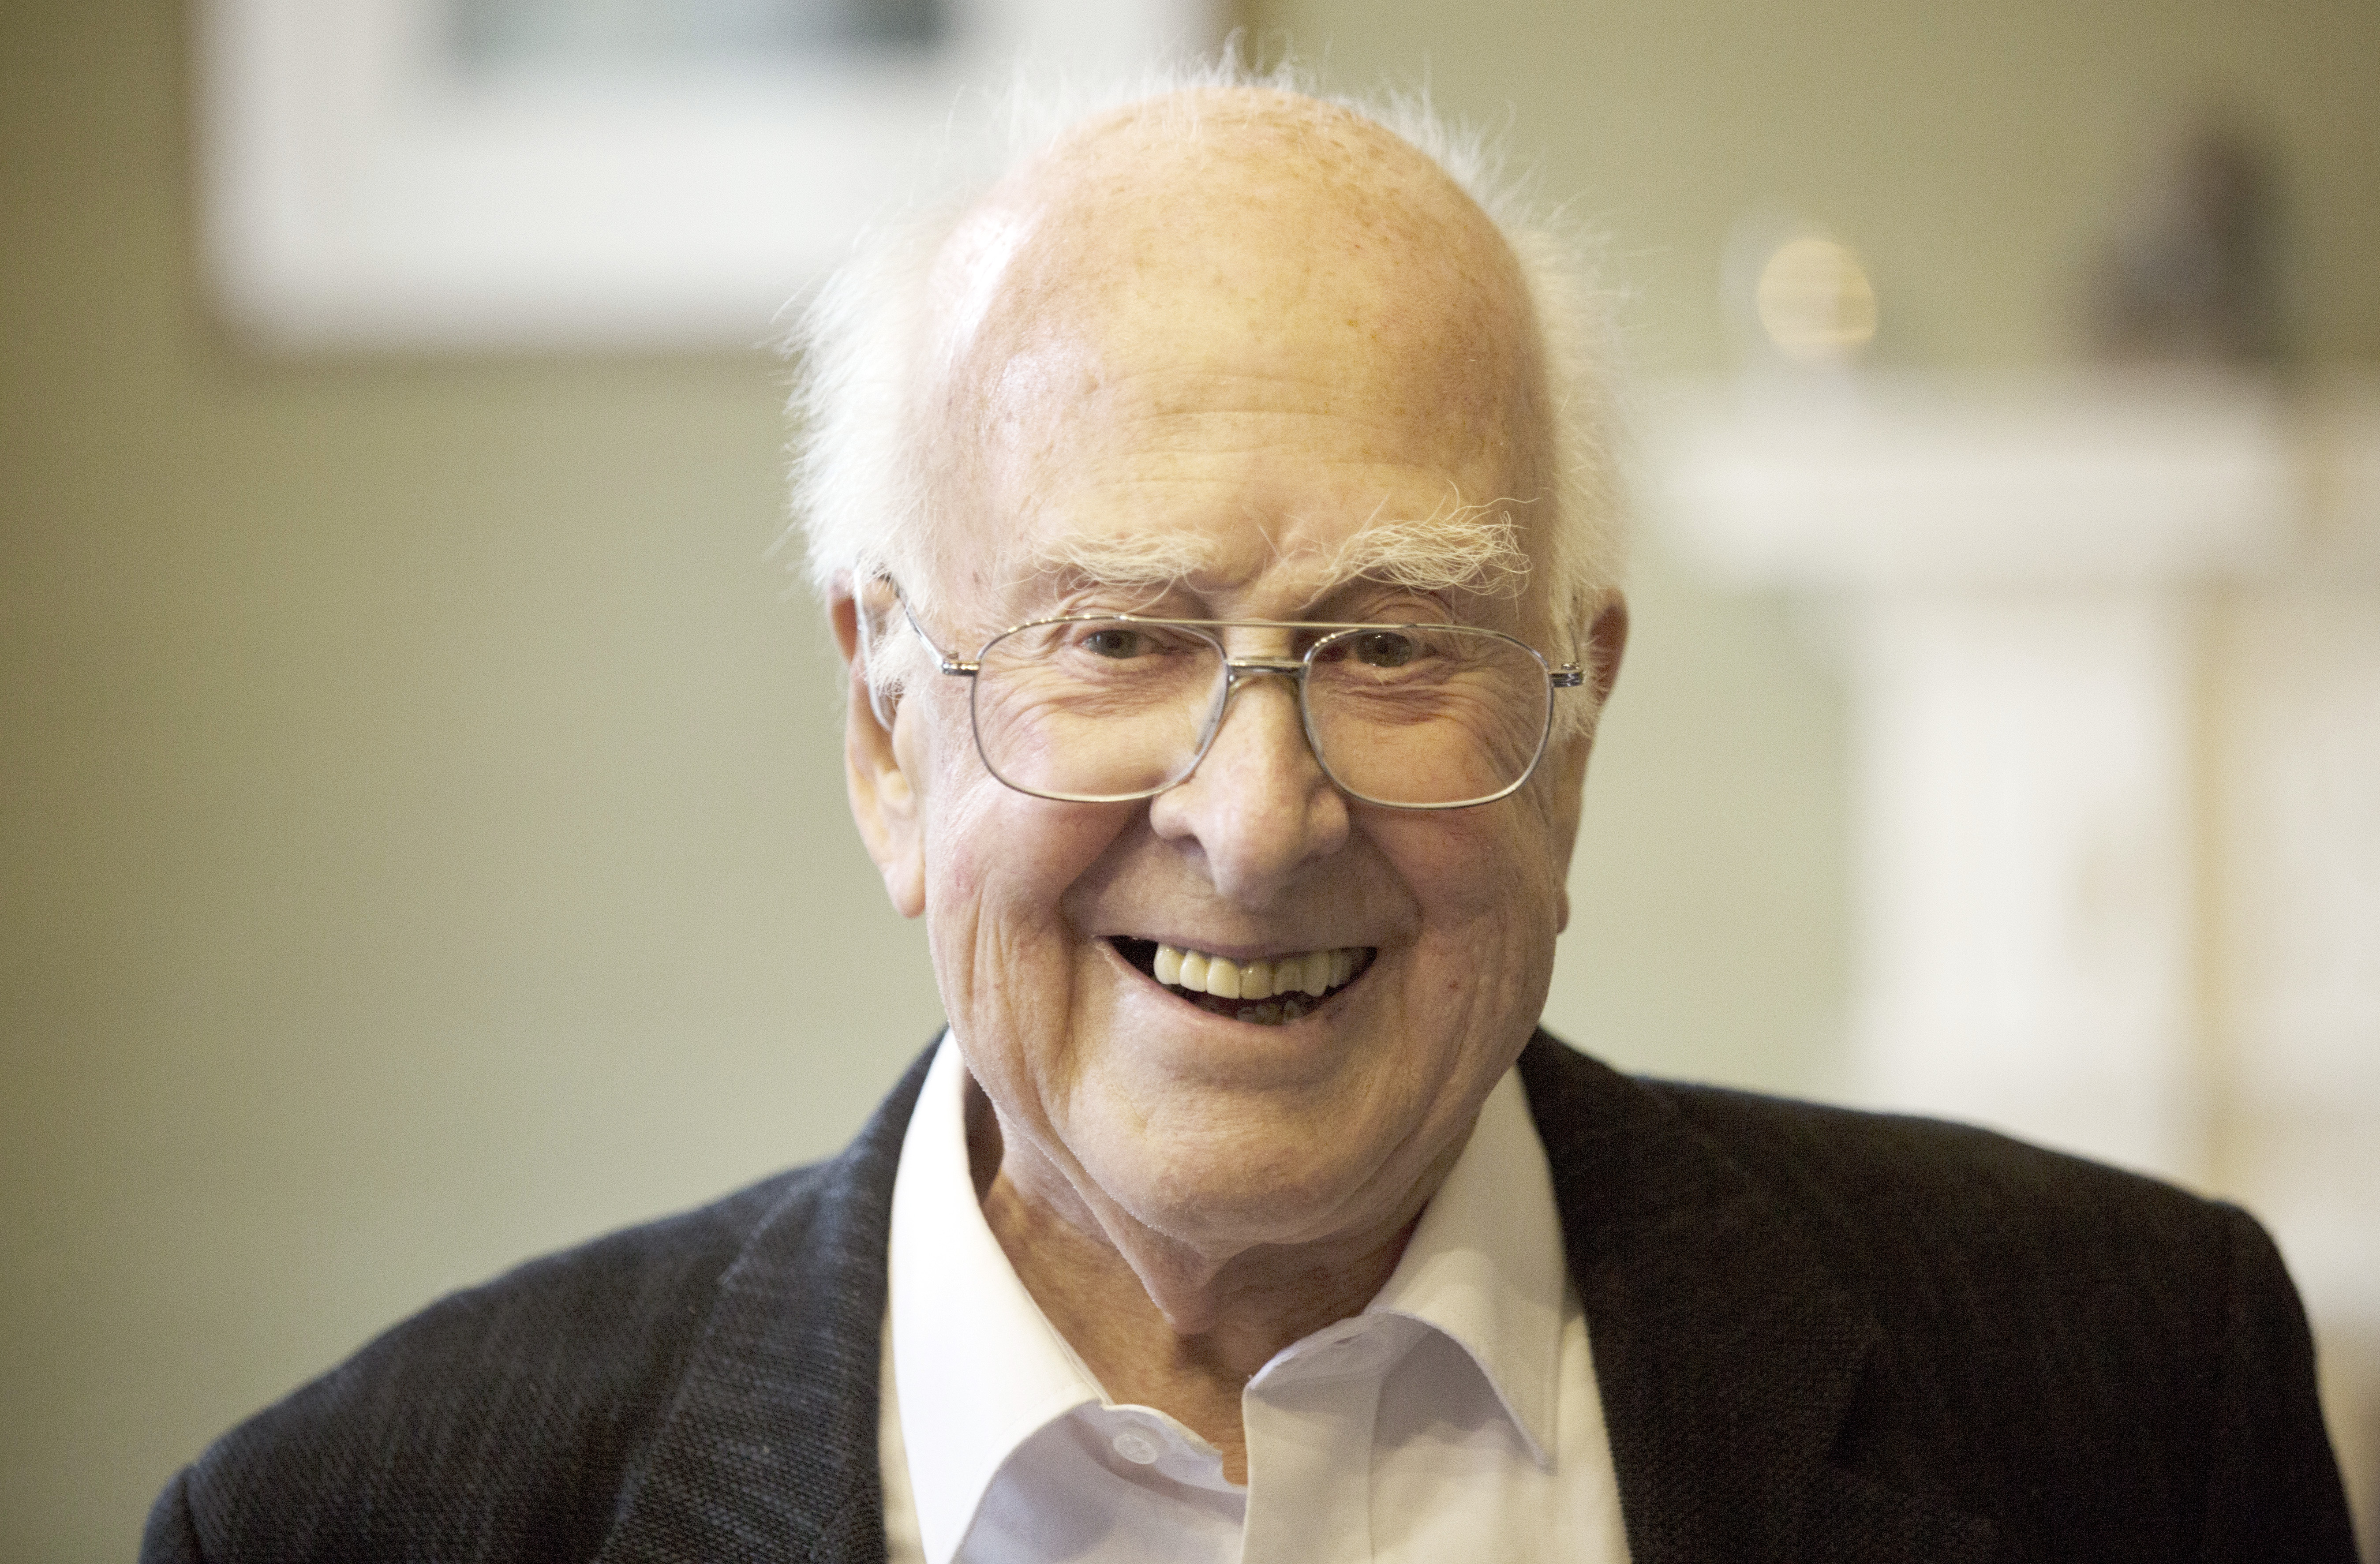 Photograph of Peter Higgs